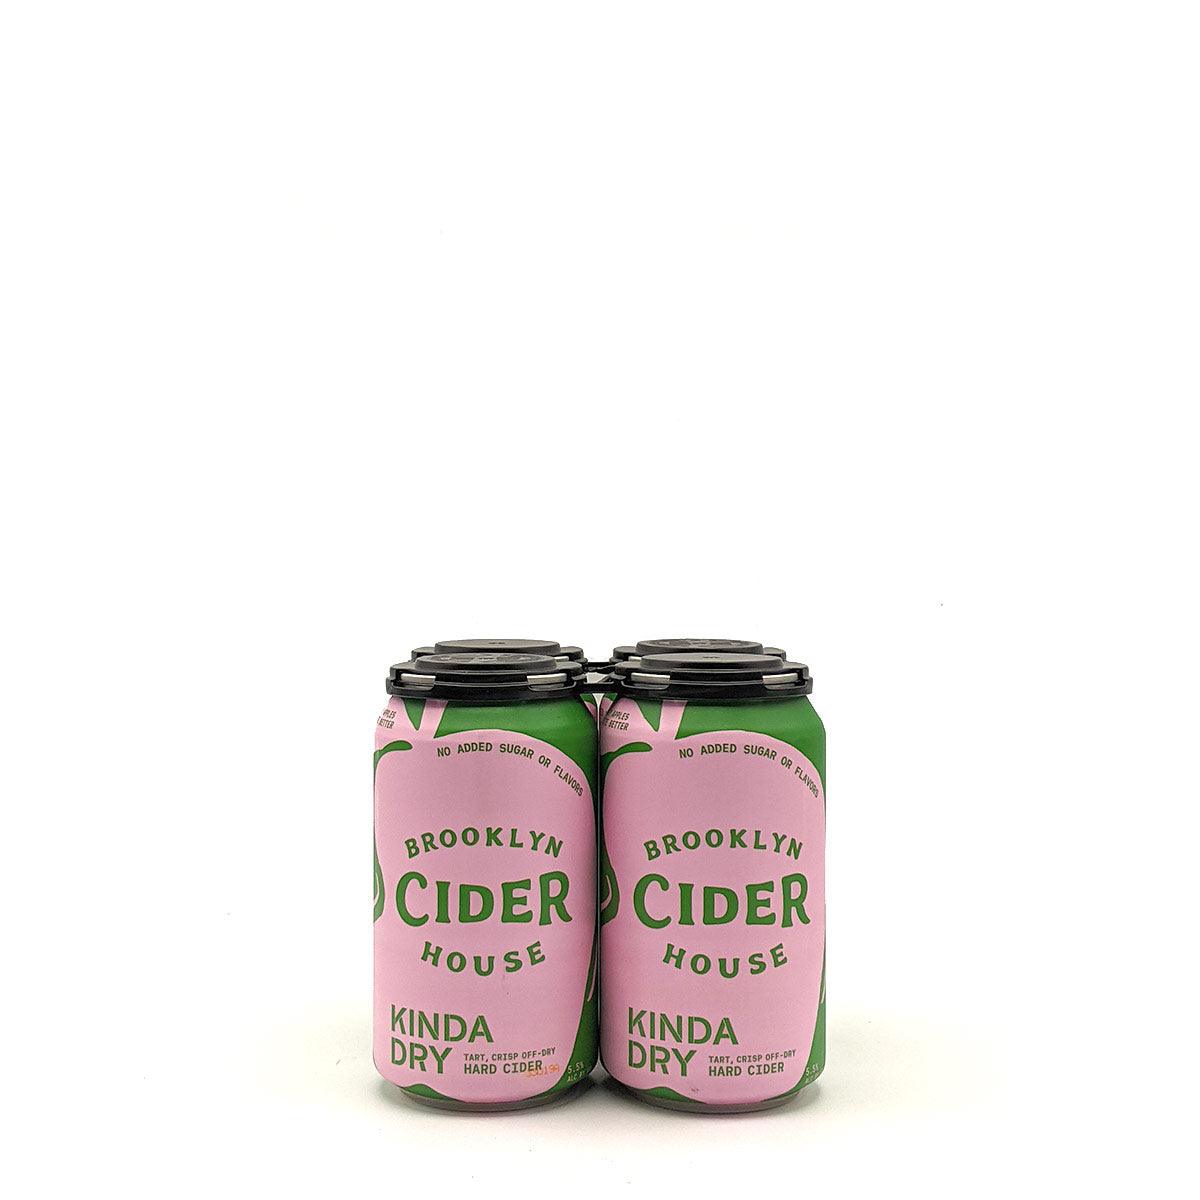 Brooklyn Cider House Kinda Dry 330ml (4-pack) - We are the Wine